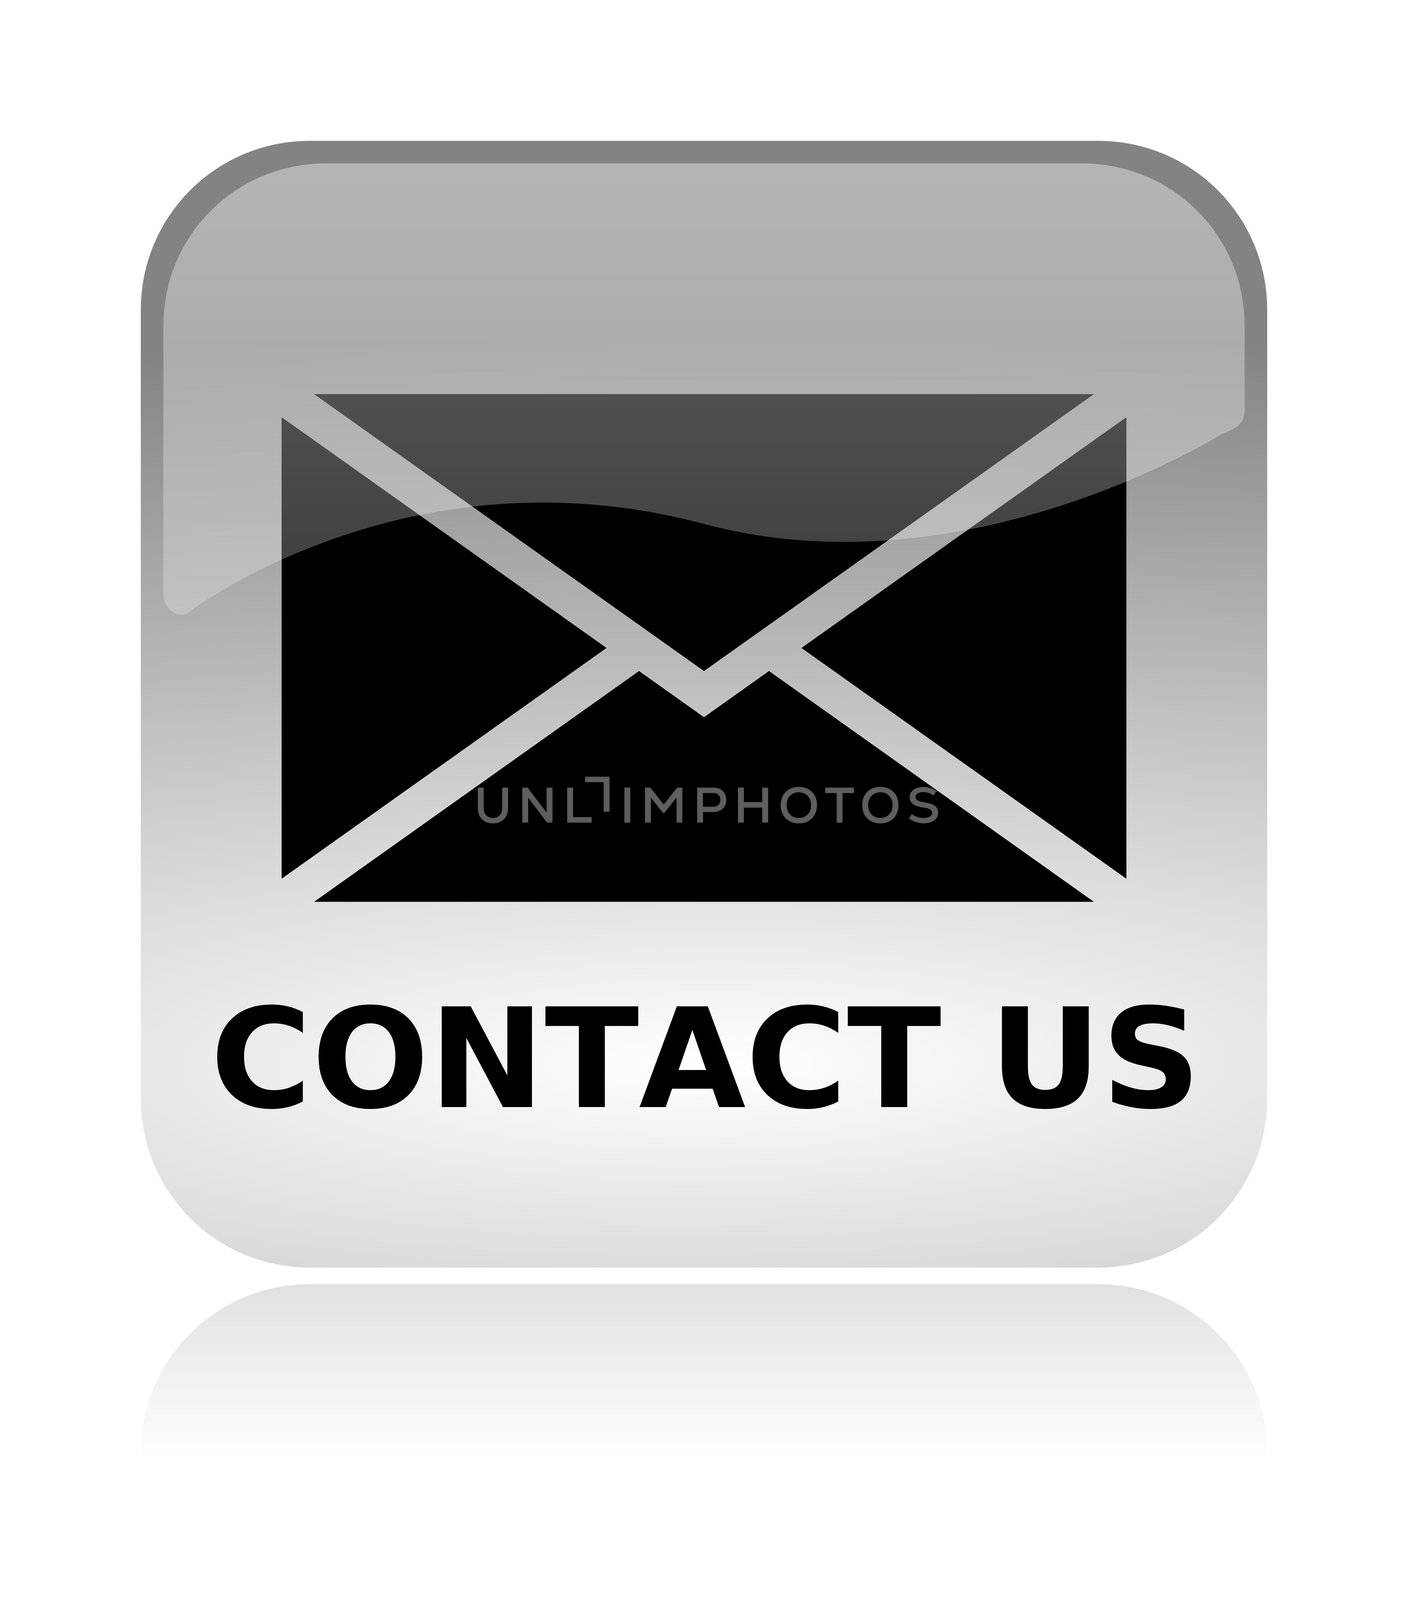 Contact us email white, transparent and glossy web interface icon with reflection